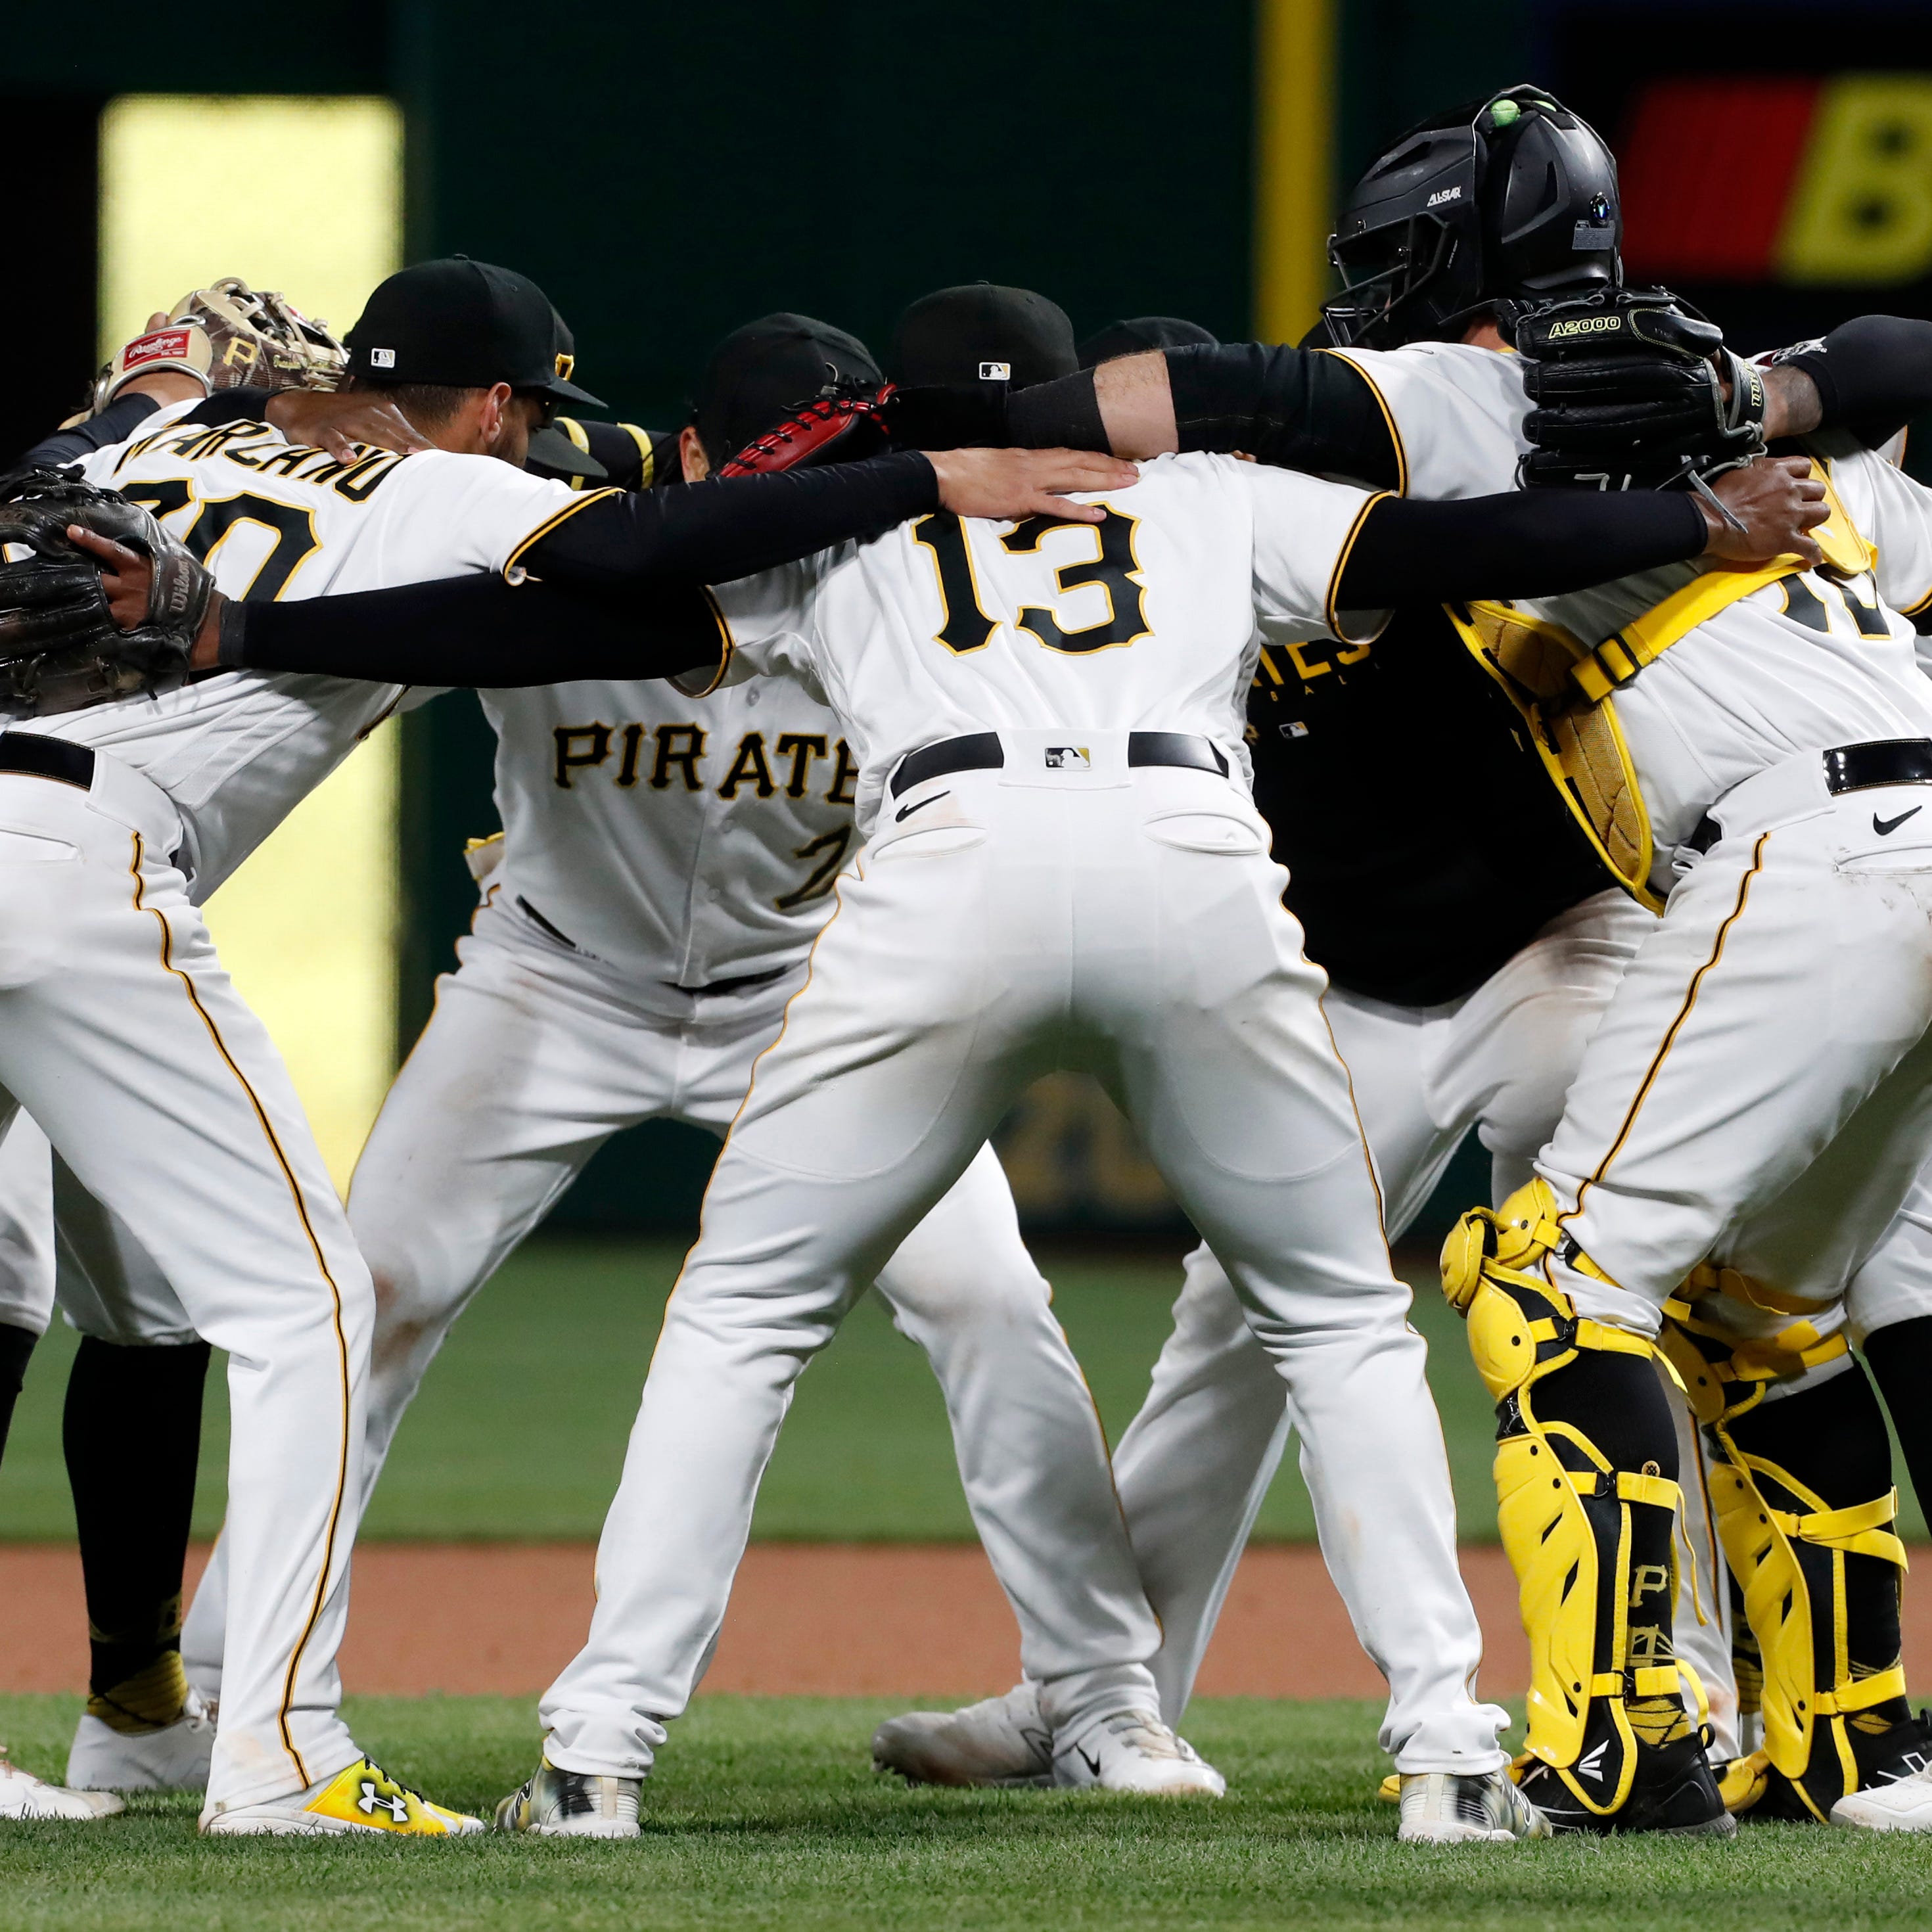 Pirates infielders and battery mates celebrate after defeating   the Reds at PNC Park.